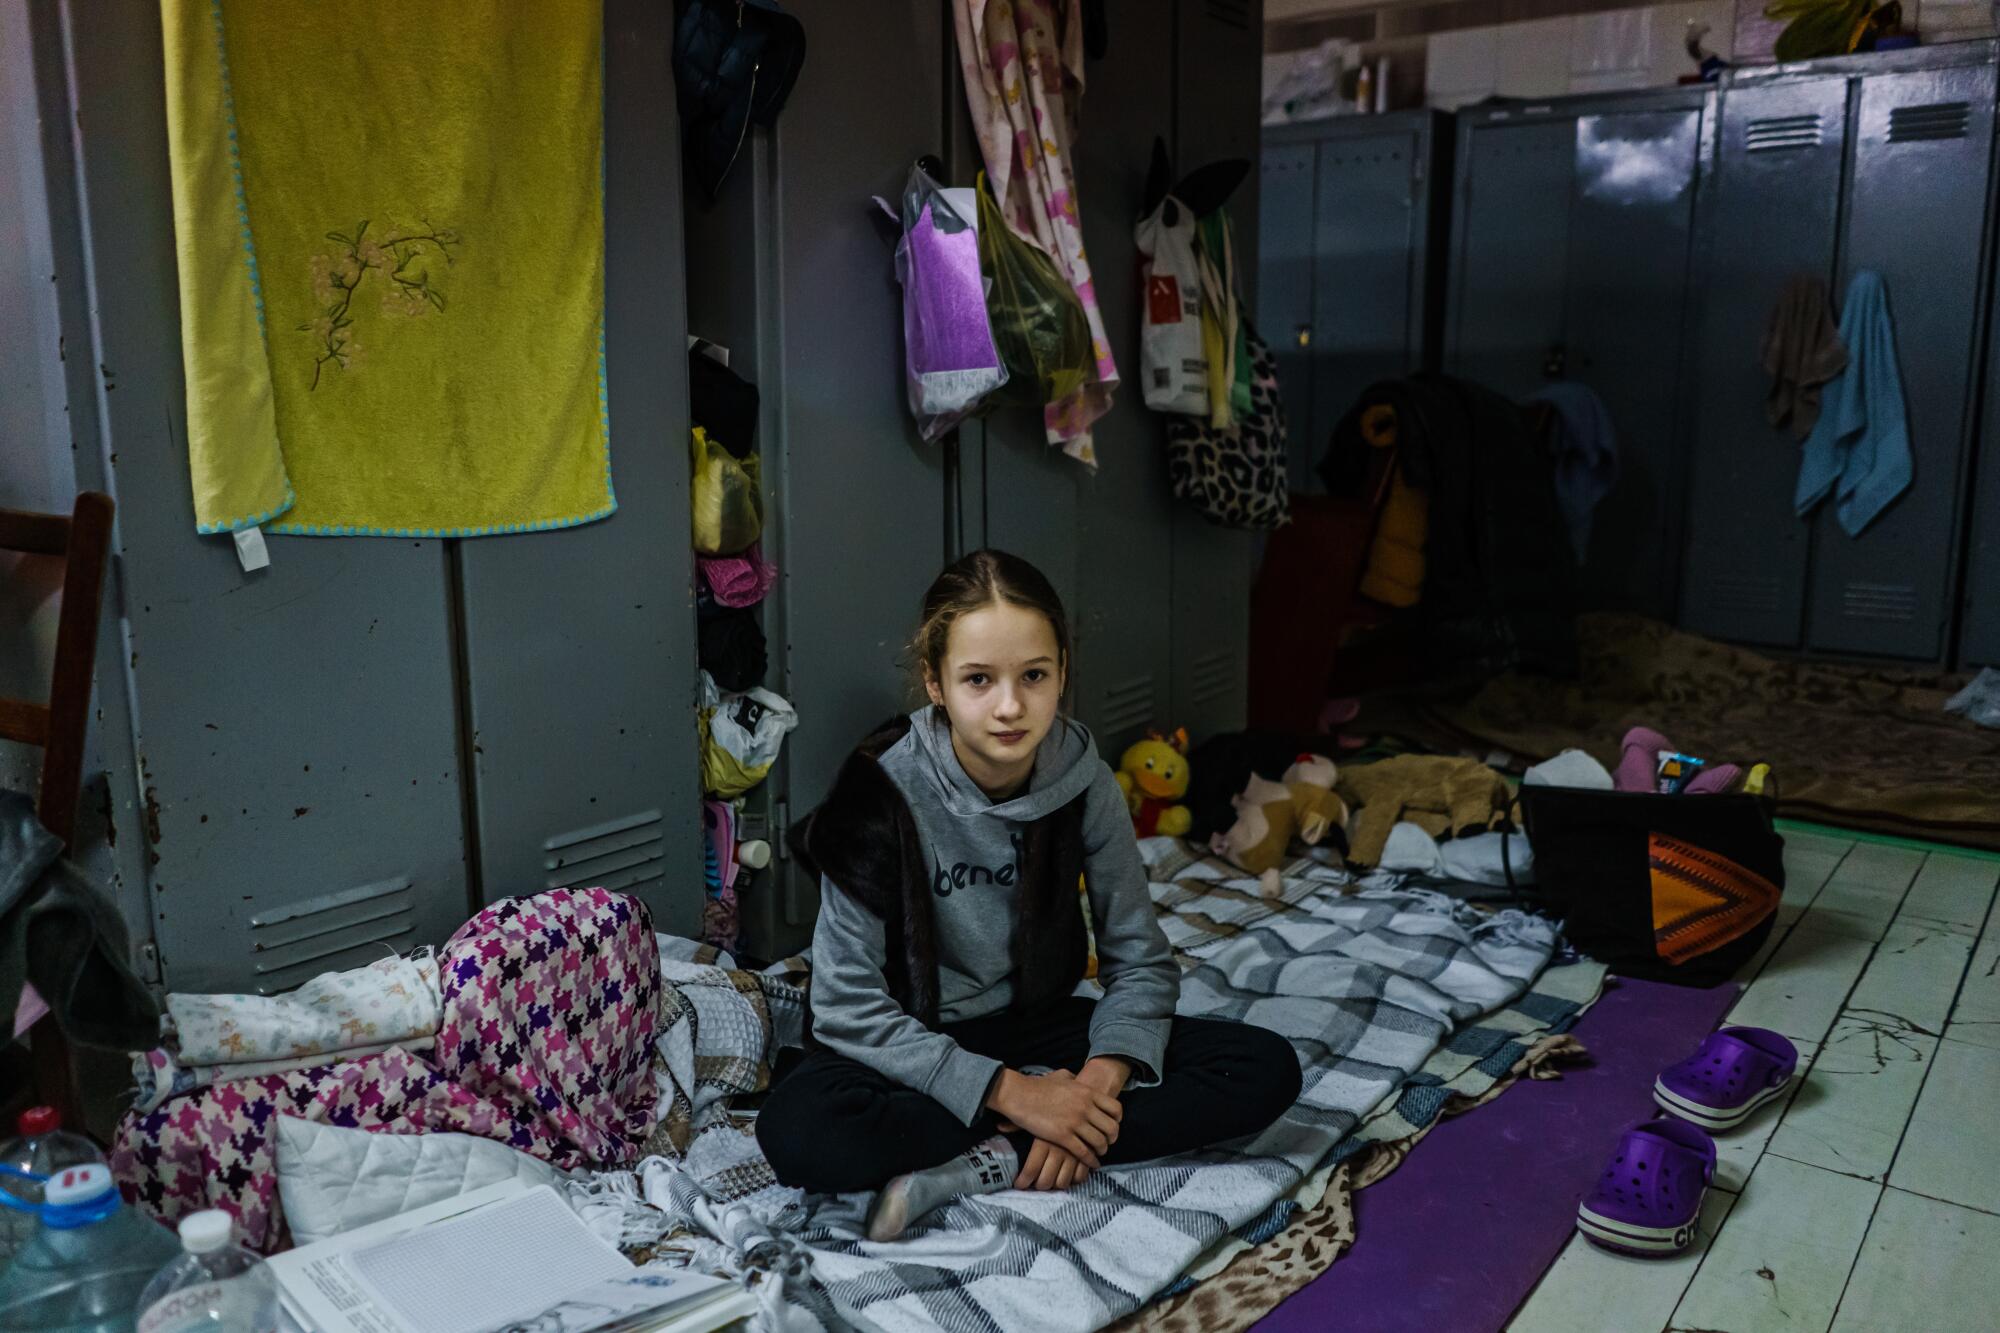 A 10-year-old girl wearing a gray long-sleeved shirt sits on top of blankets on a tiled floor next to metal storage lockers.